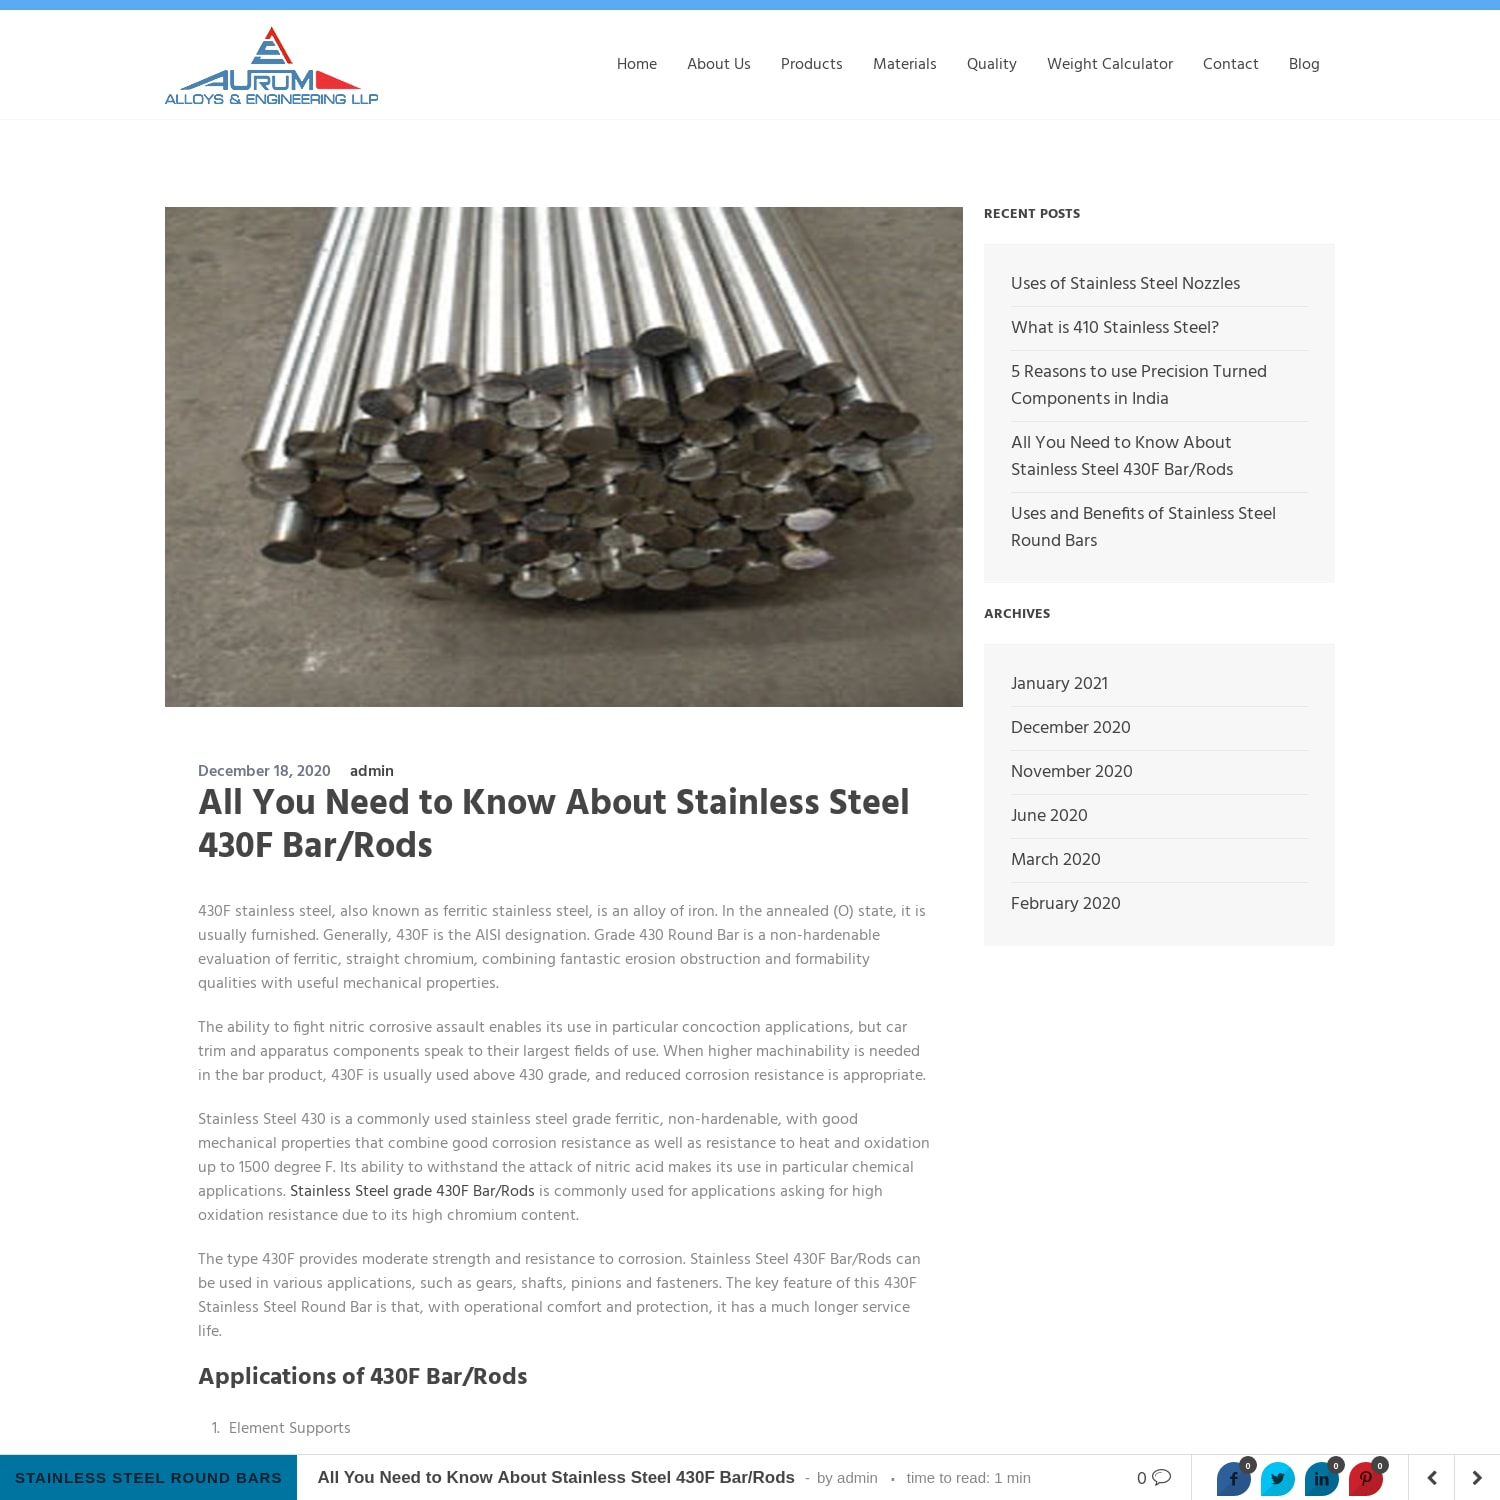 All You Need to Know About Stainless Steel 430F Bar/Rods